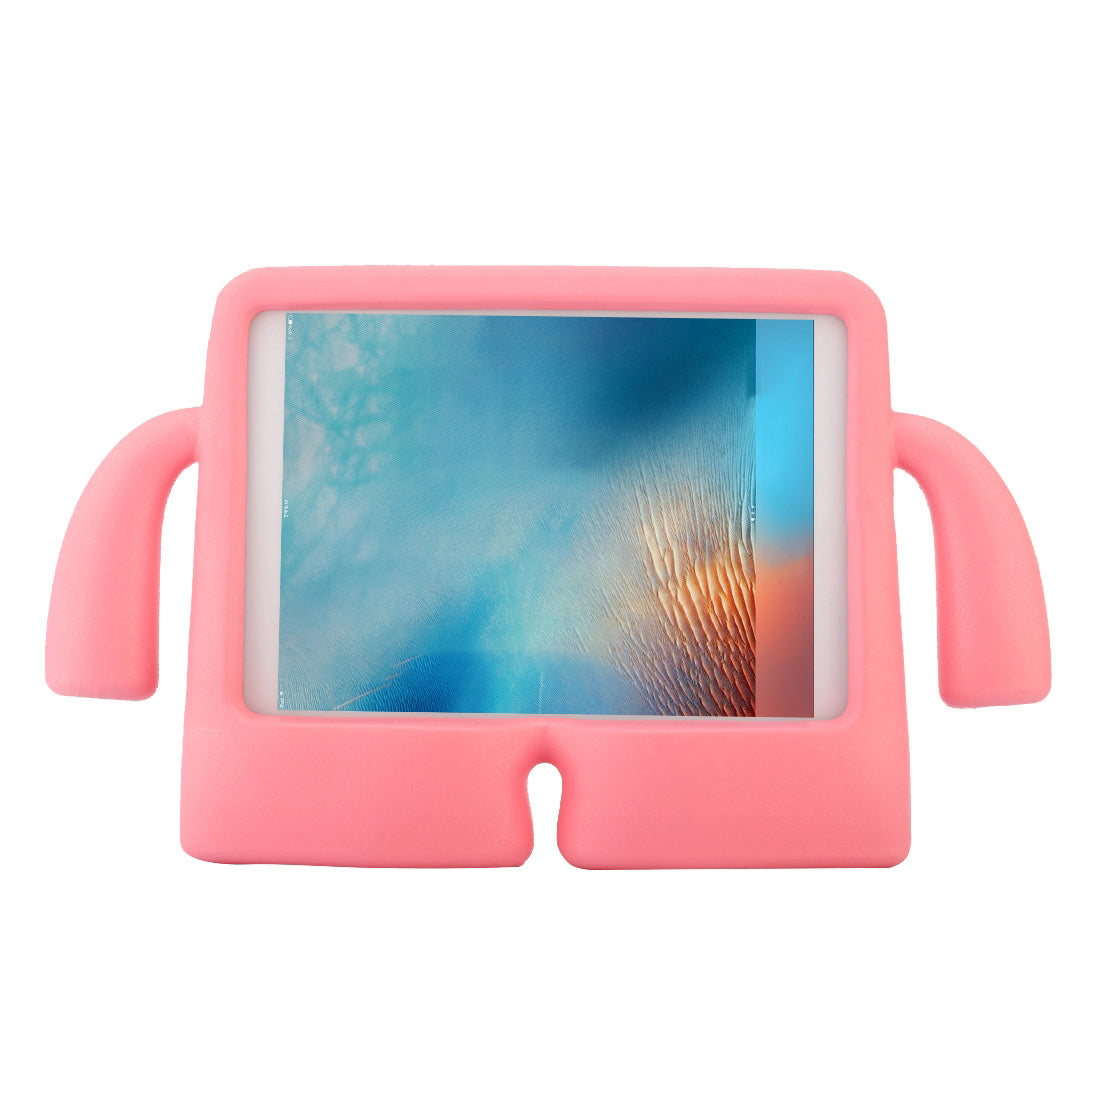 For Apple iPad Air 3 10.5" 2019 Kids Case Shockproof Cover With Carry Handle - Pink